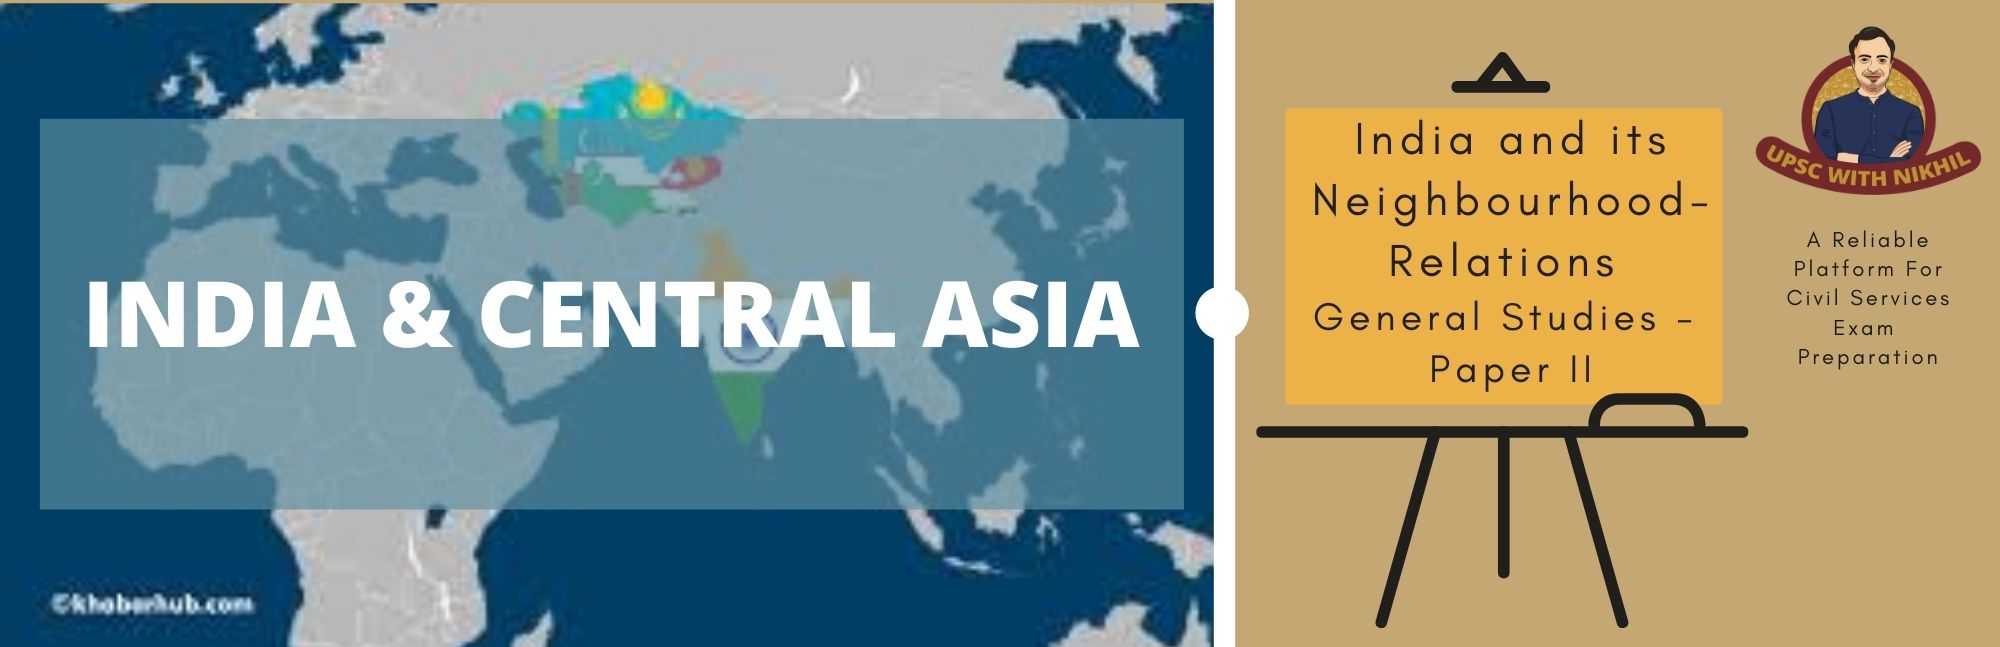 India & Central Asia